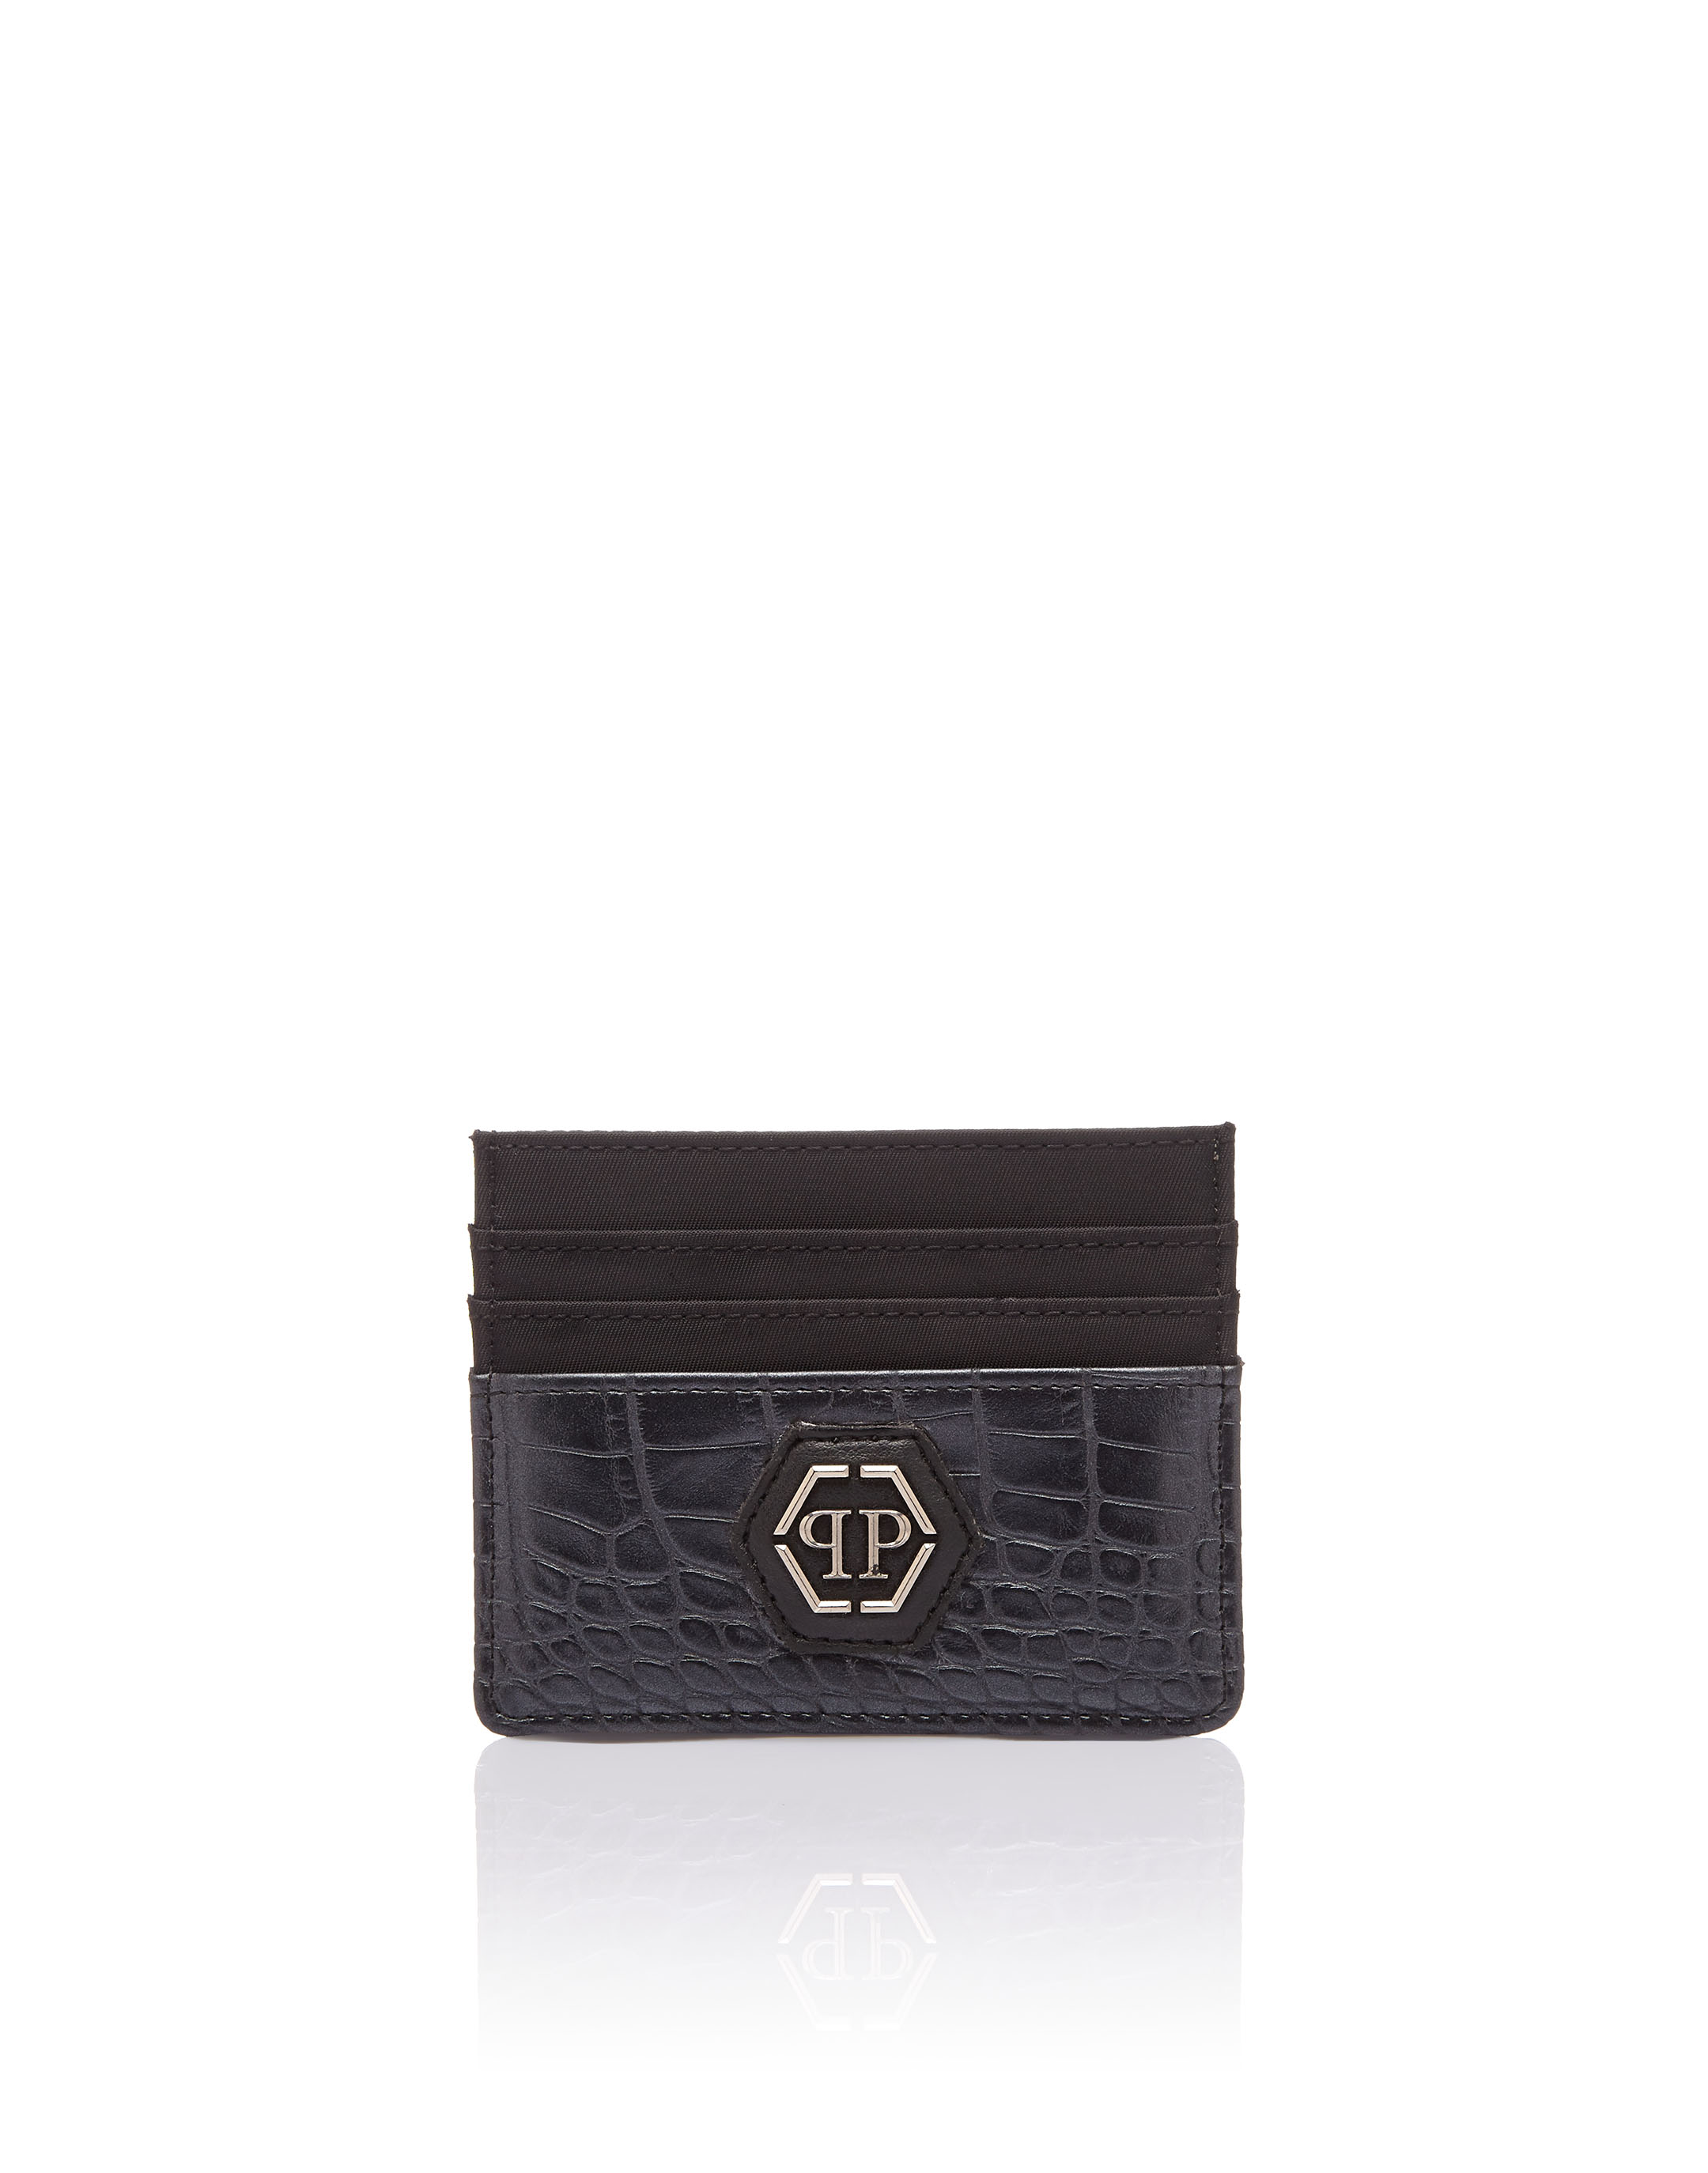 Credit Cards Holder "Paul" | Philipp Plein Outlet